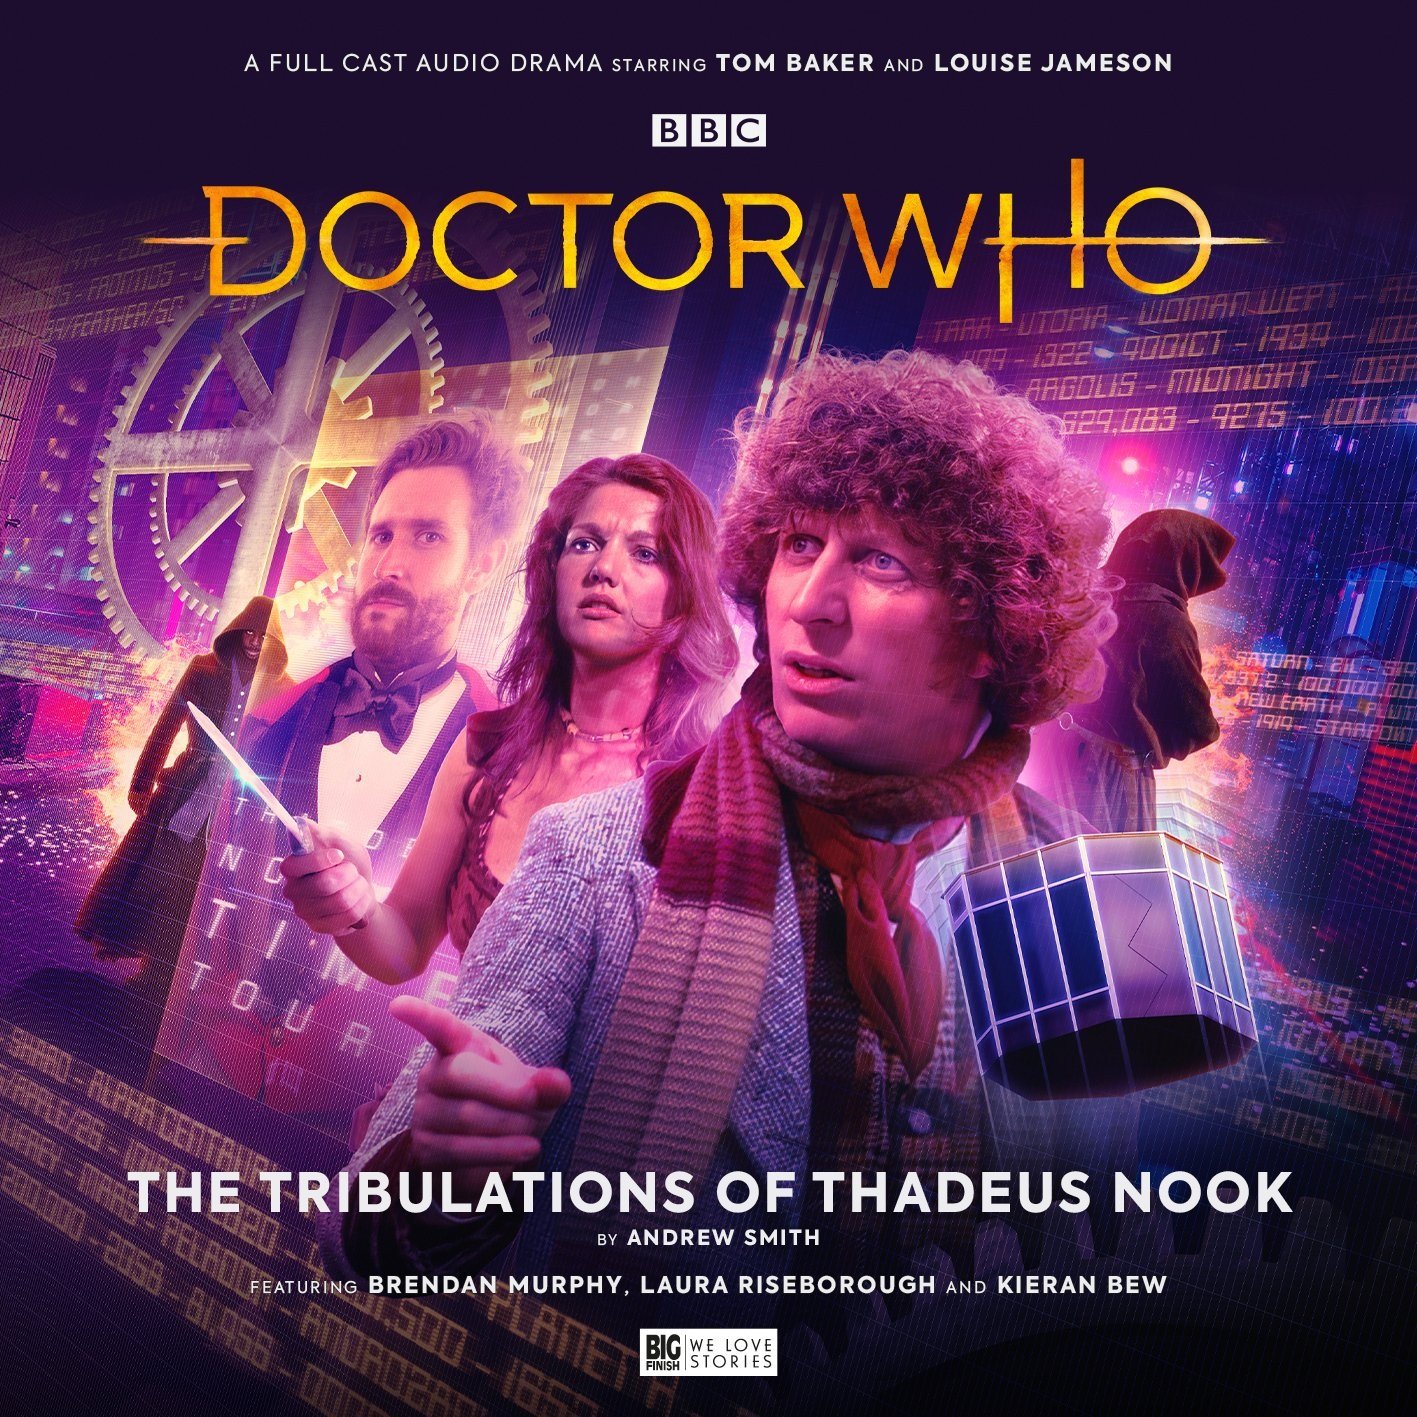 Reviewed: Big Finish’s Fourth Doctor Adventures – The Tribulations of Thadeus Nook